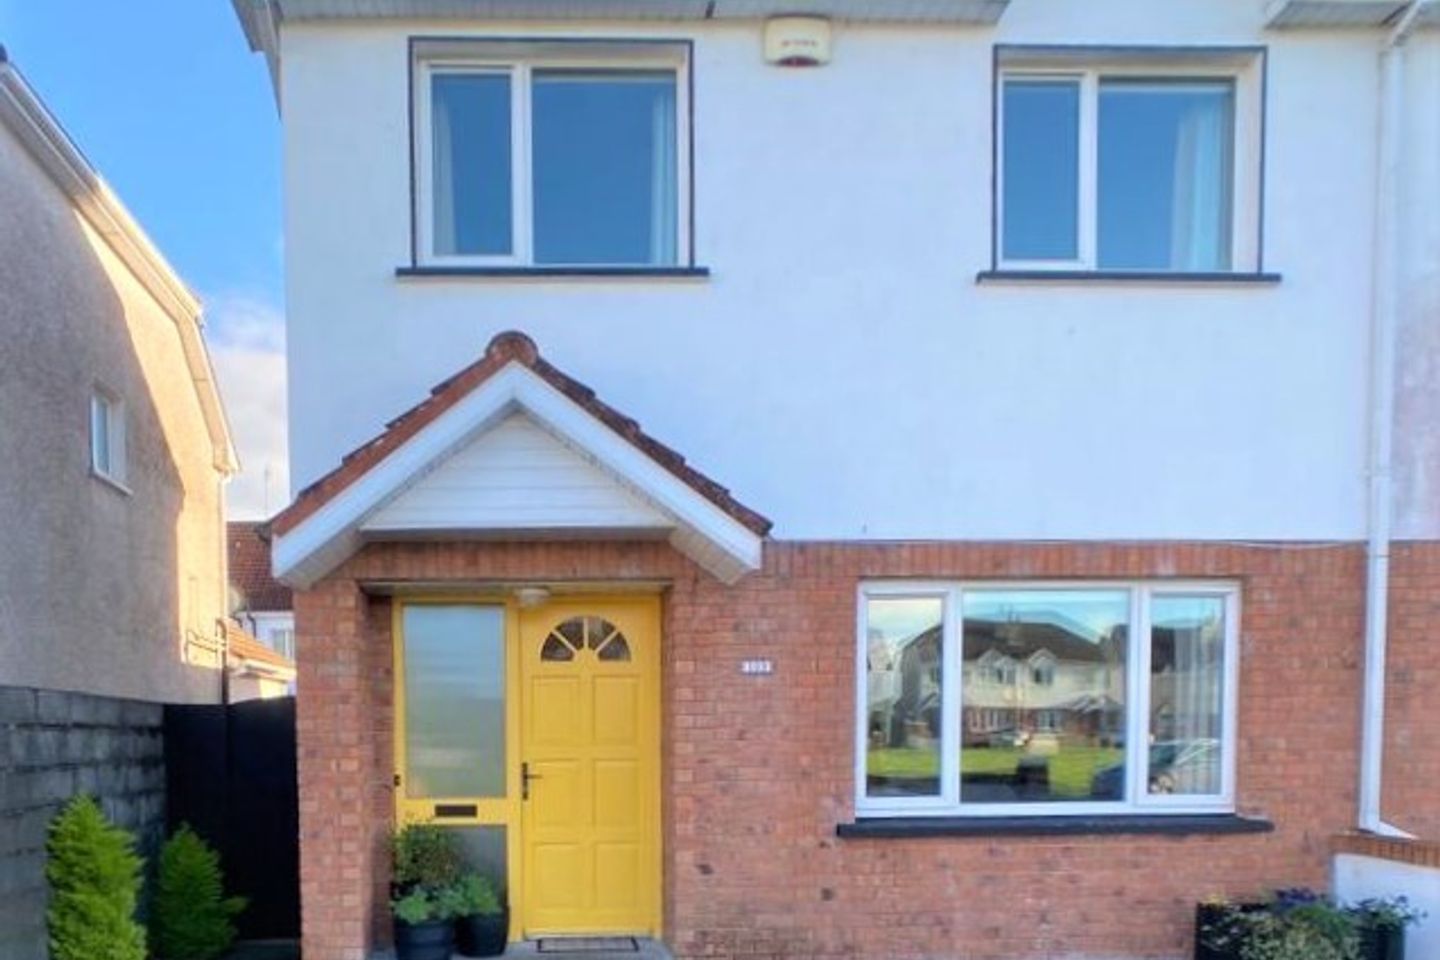 103 Woodfield, Galway Road, Tuam, Co. Galway